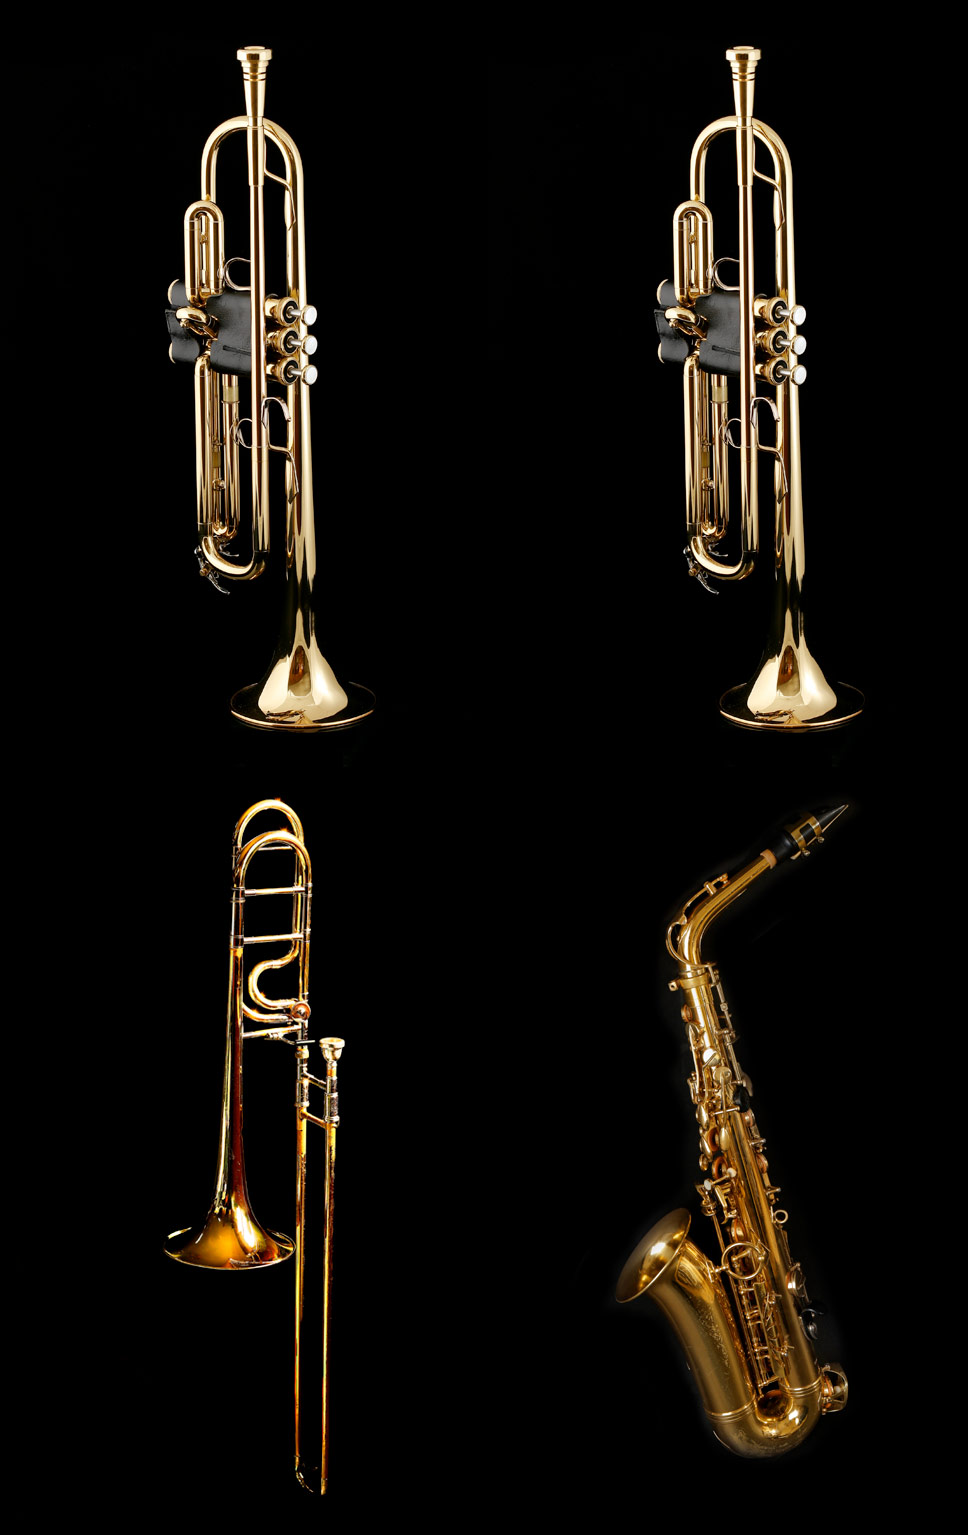 Instruments Collage